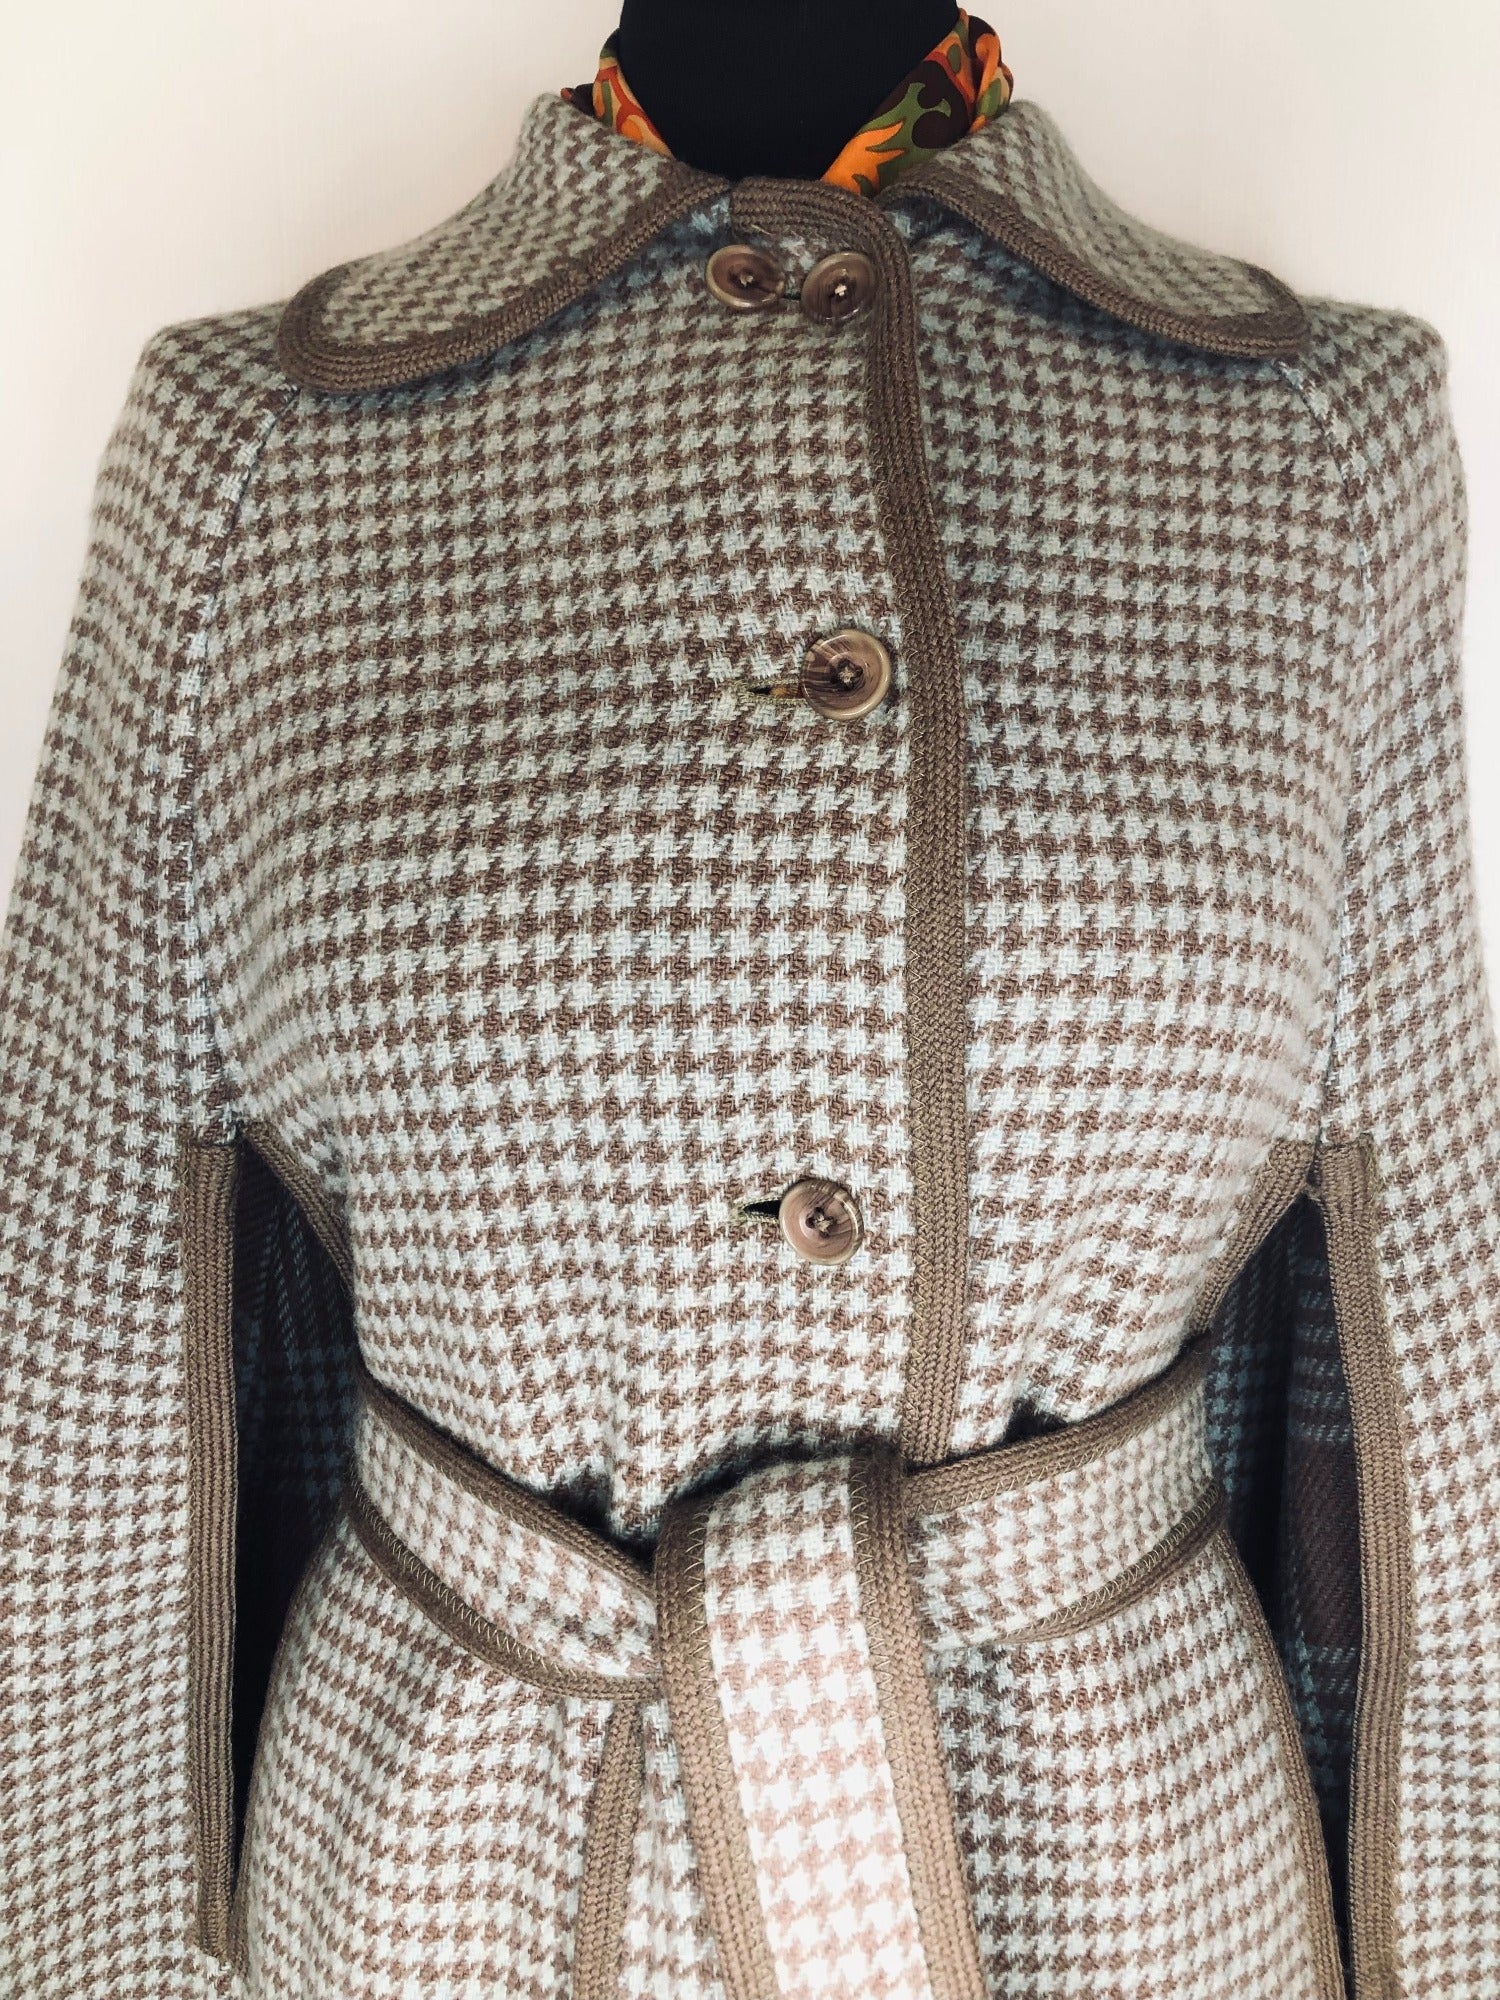 wool  womens  wetherall  waistcoat  vintage  S  MOD  gingham  cape  brown  blue  60s  1960s